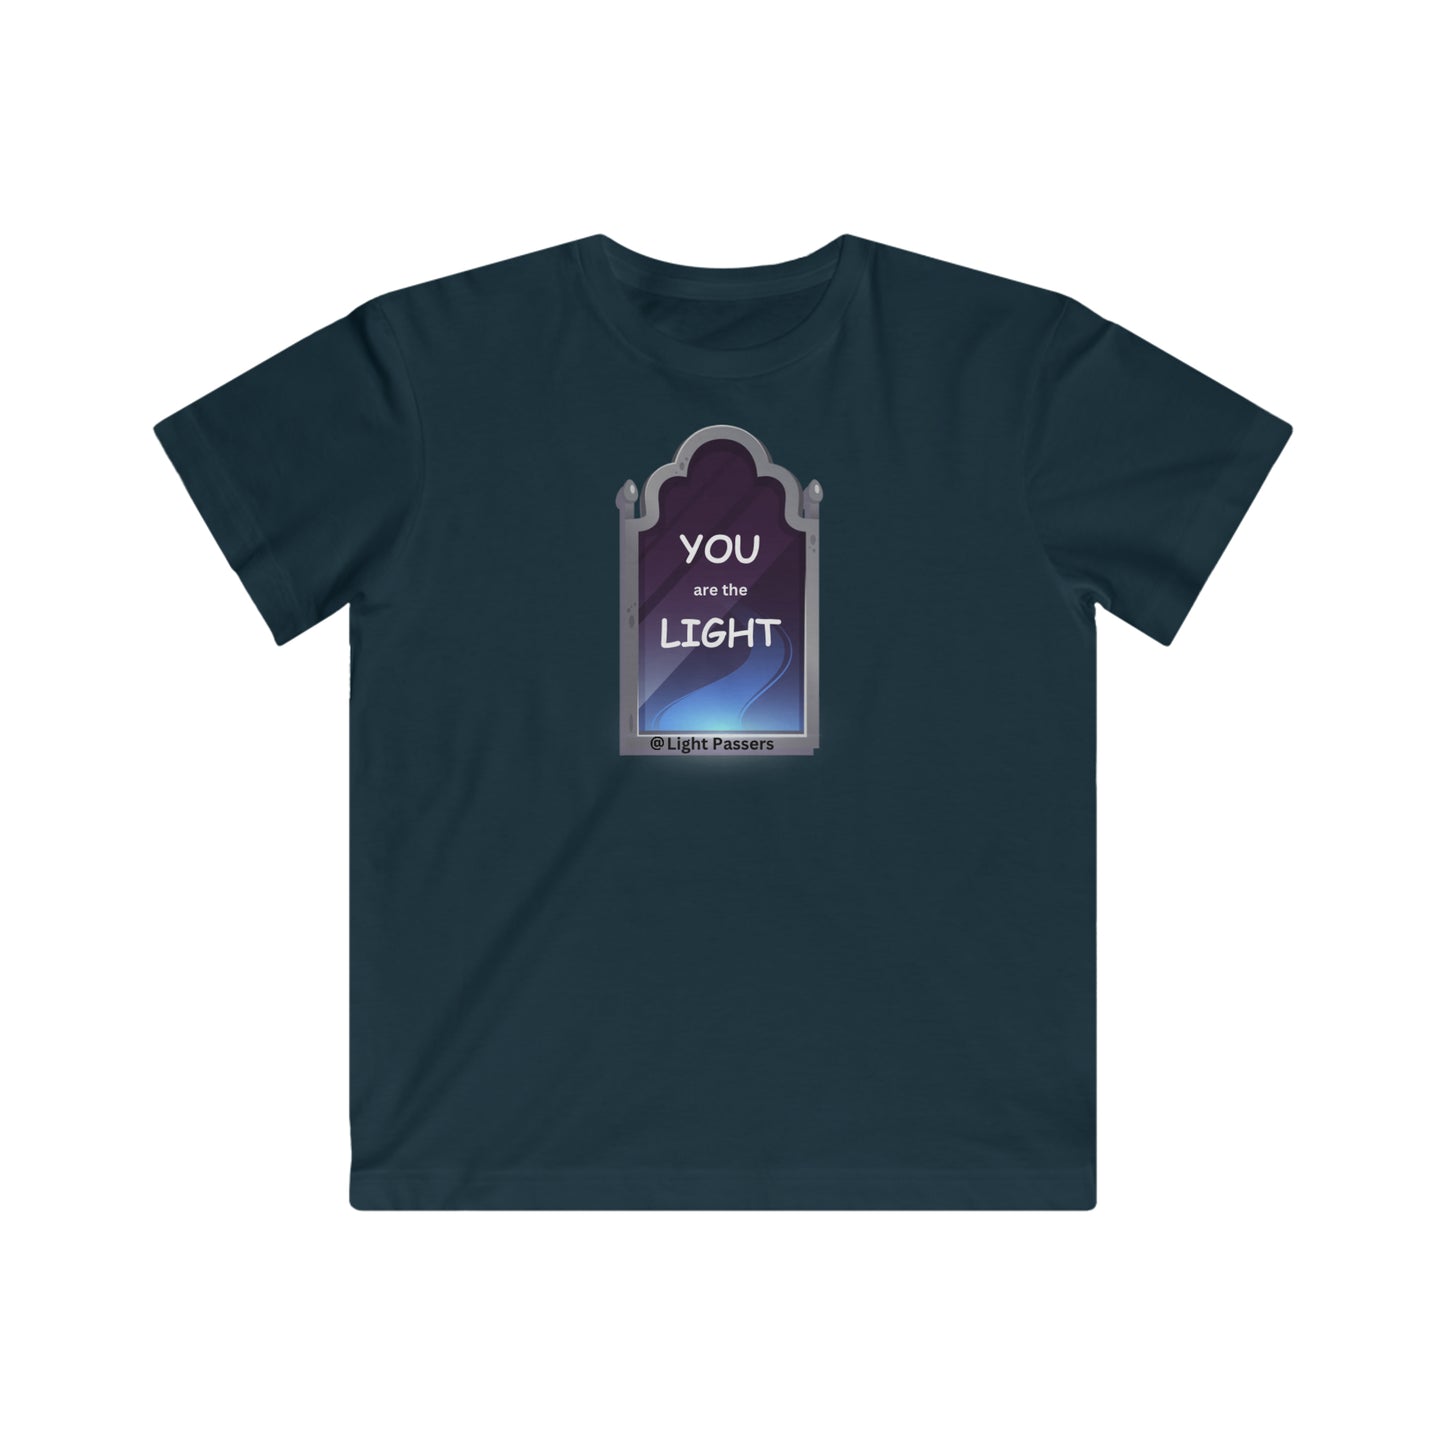 Light Passers Marketplace Loving "You are the Light" Youth Fine Jersey Tee Simple messages, Mental Health